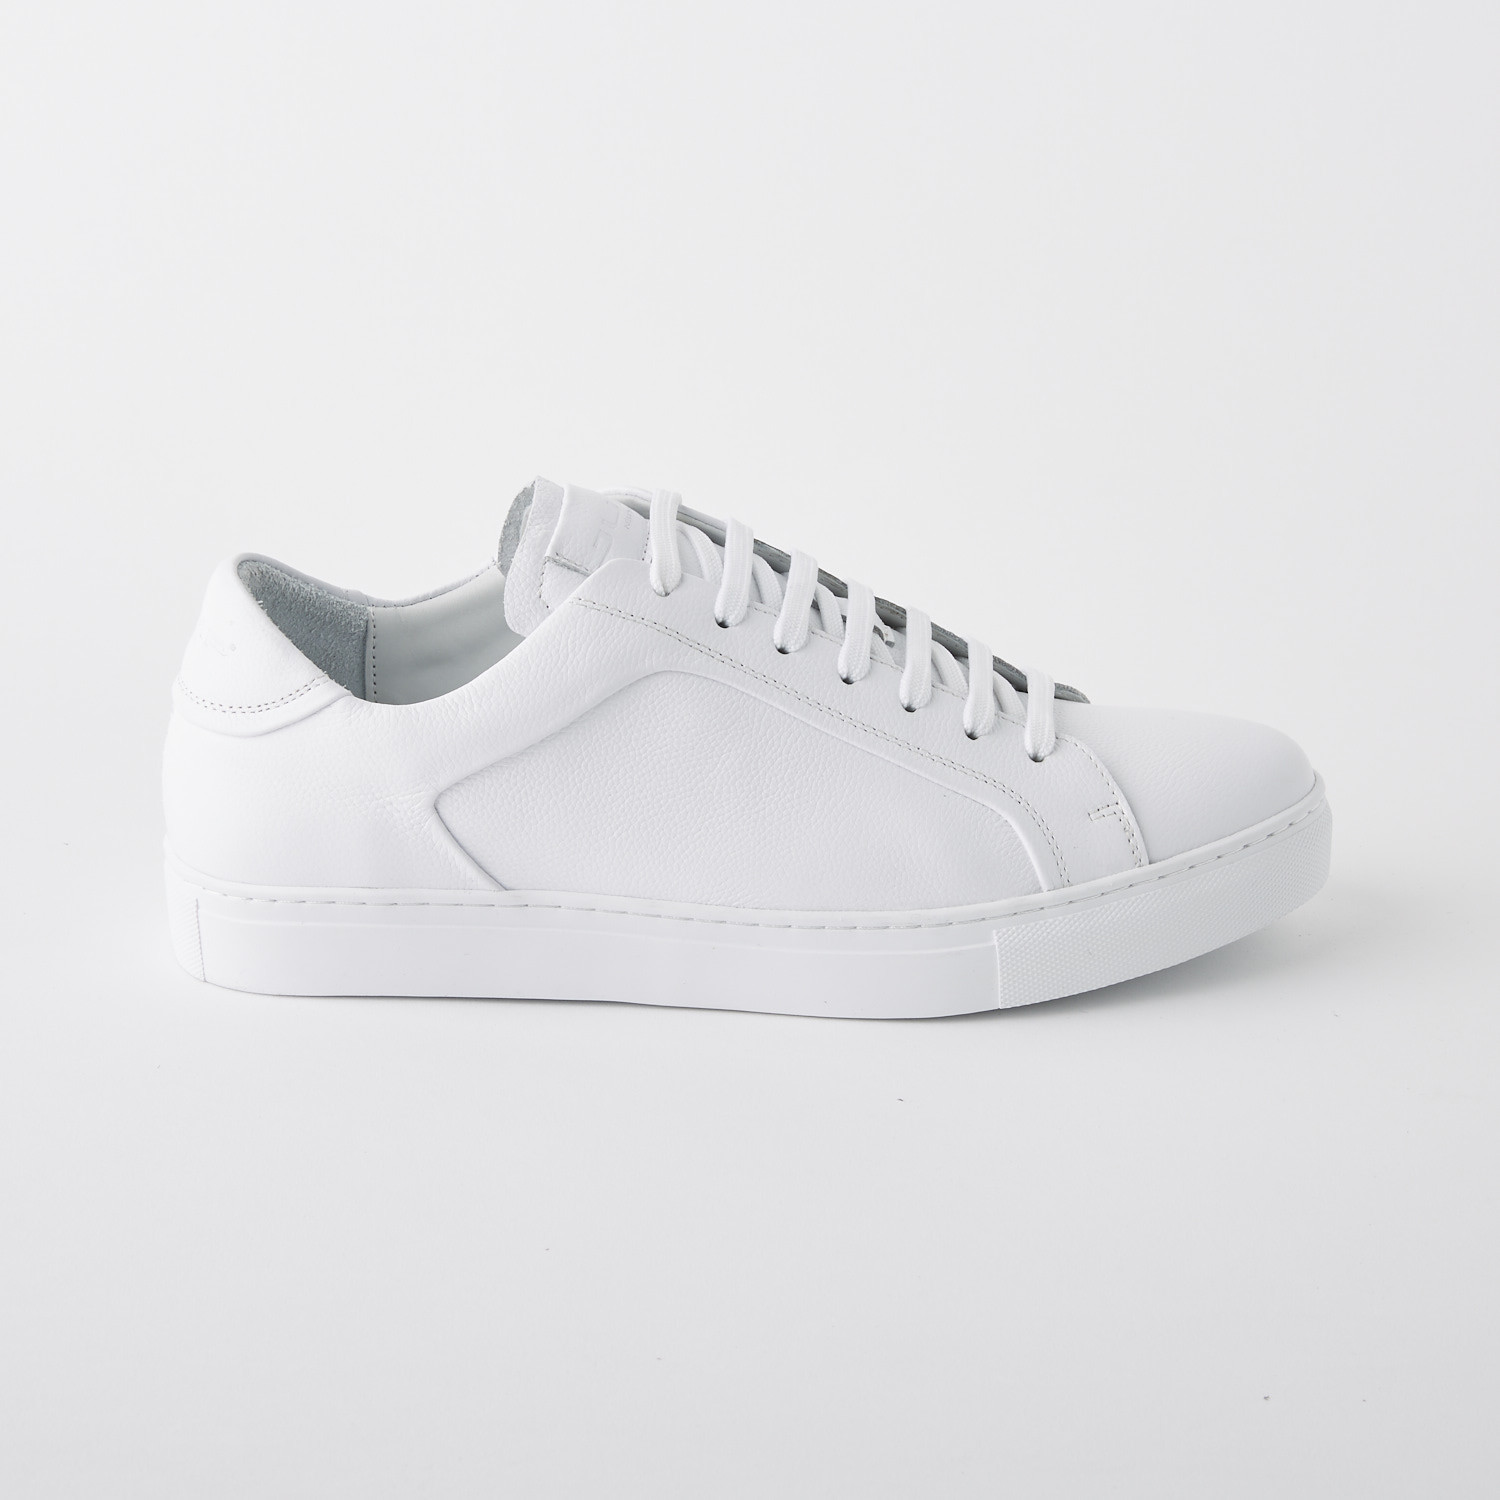 Bloke-Low Lace-Up Sneaker // White Leather (US: 7) - J75 - Touch of Modern